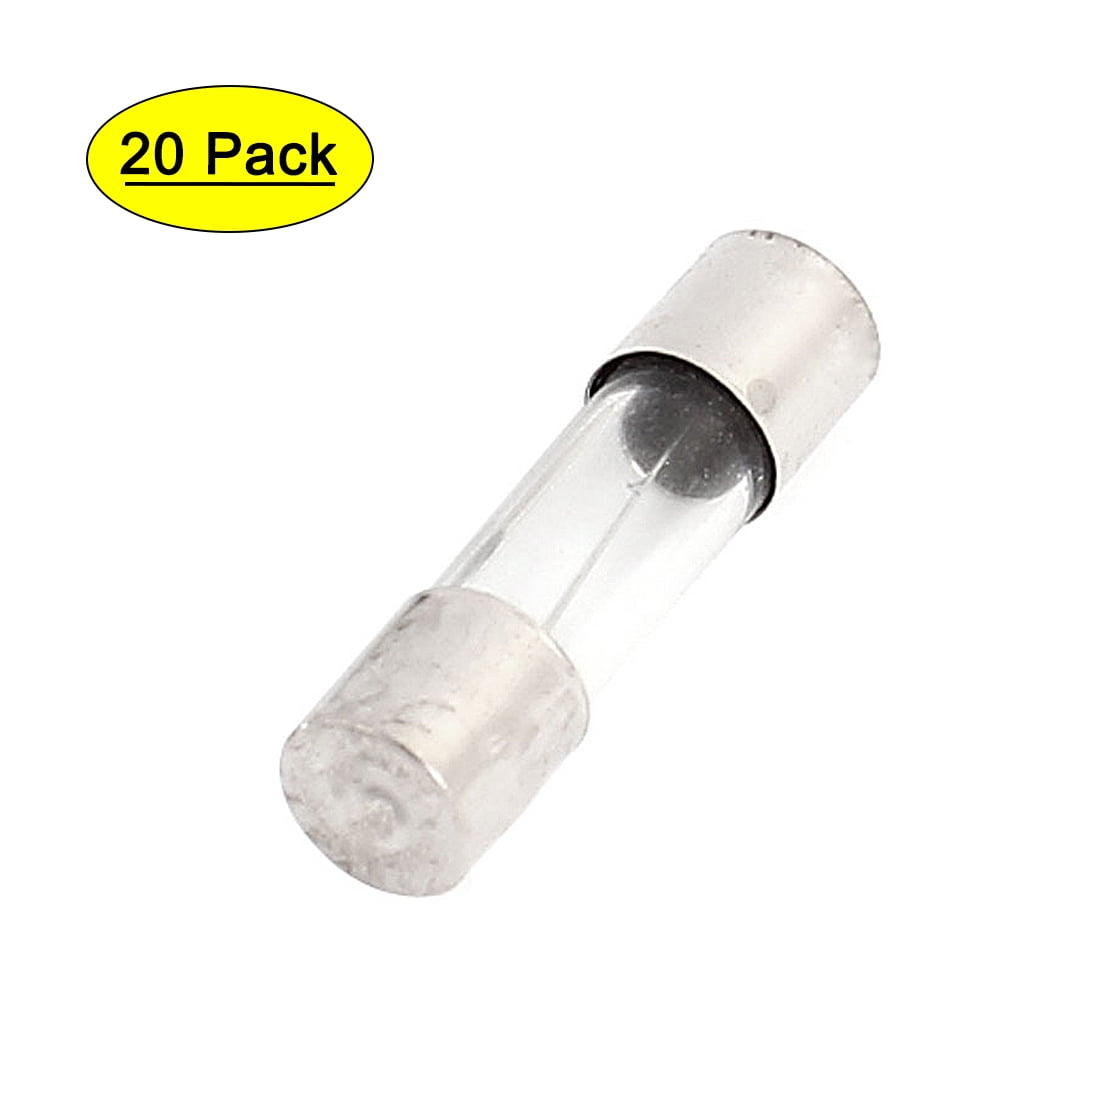 CERAMIC Fuse 5x20mm Quick Blow Fast Acting 250V Tube Body 